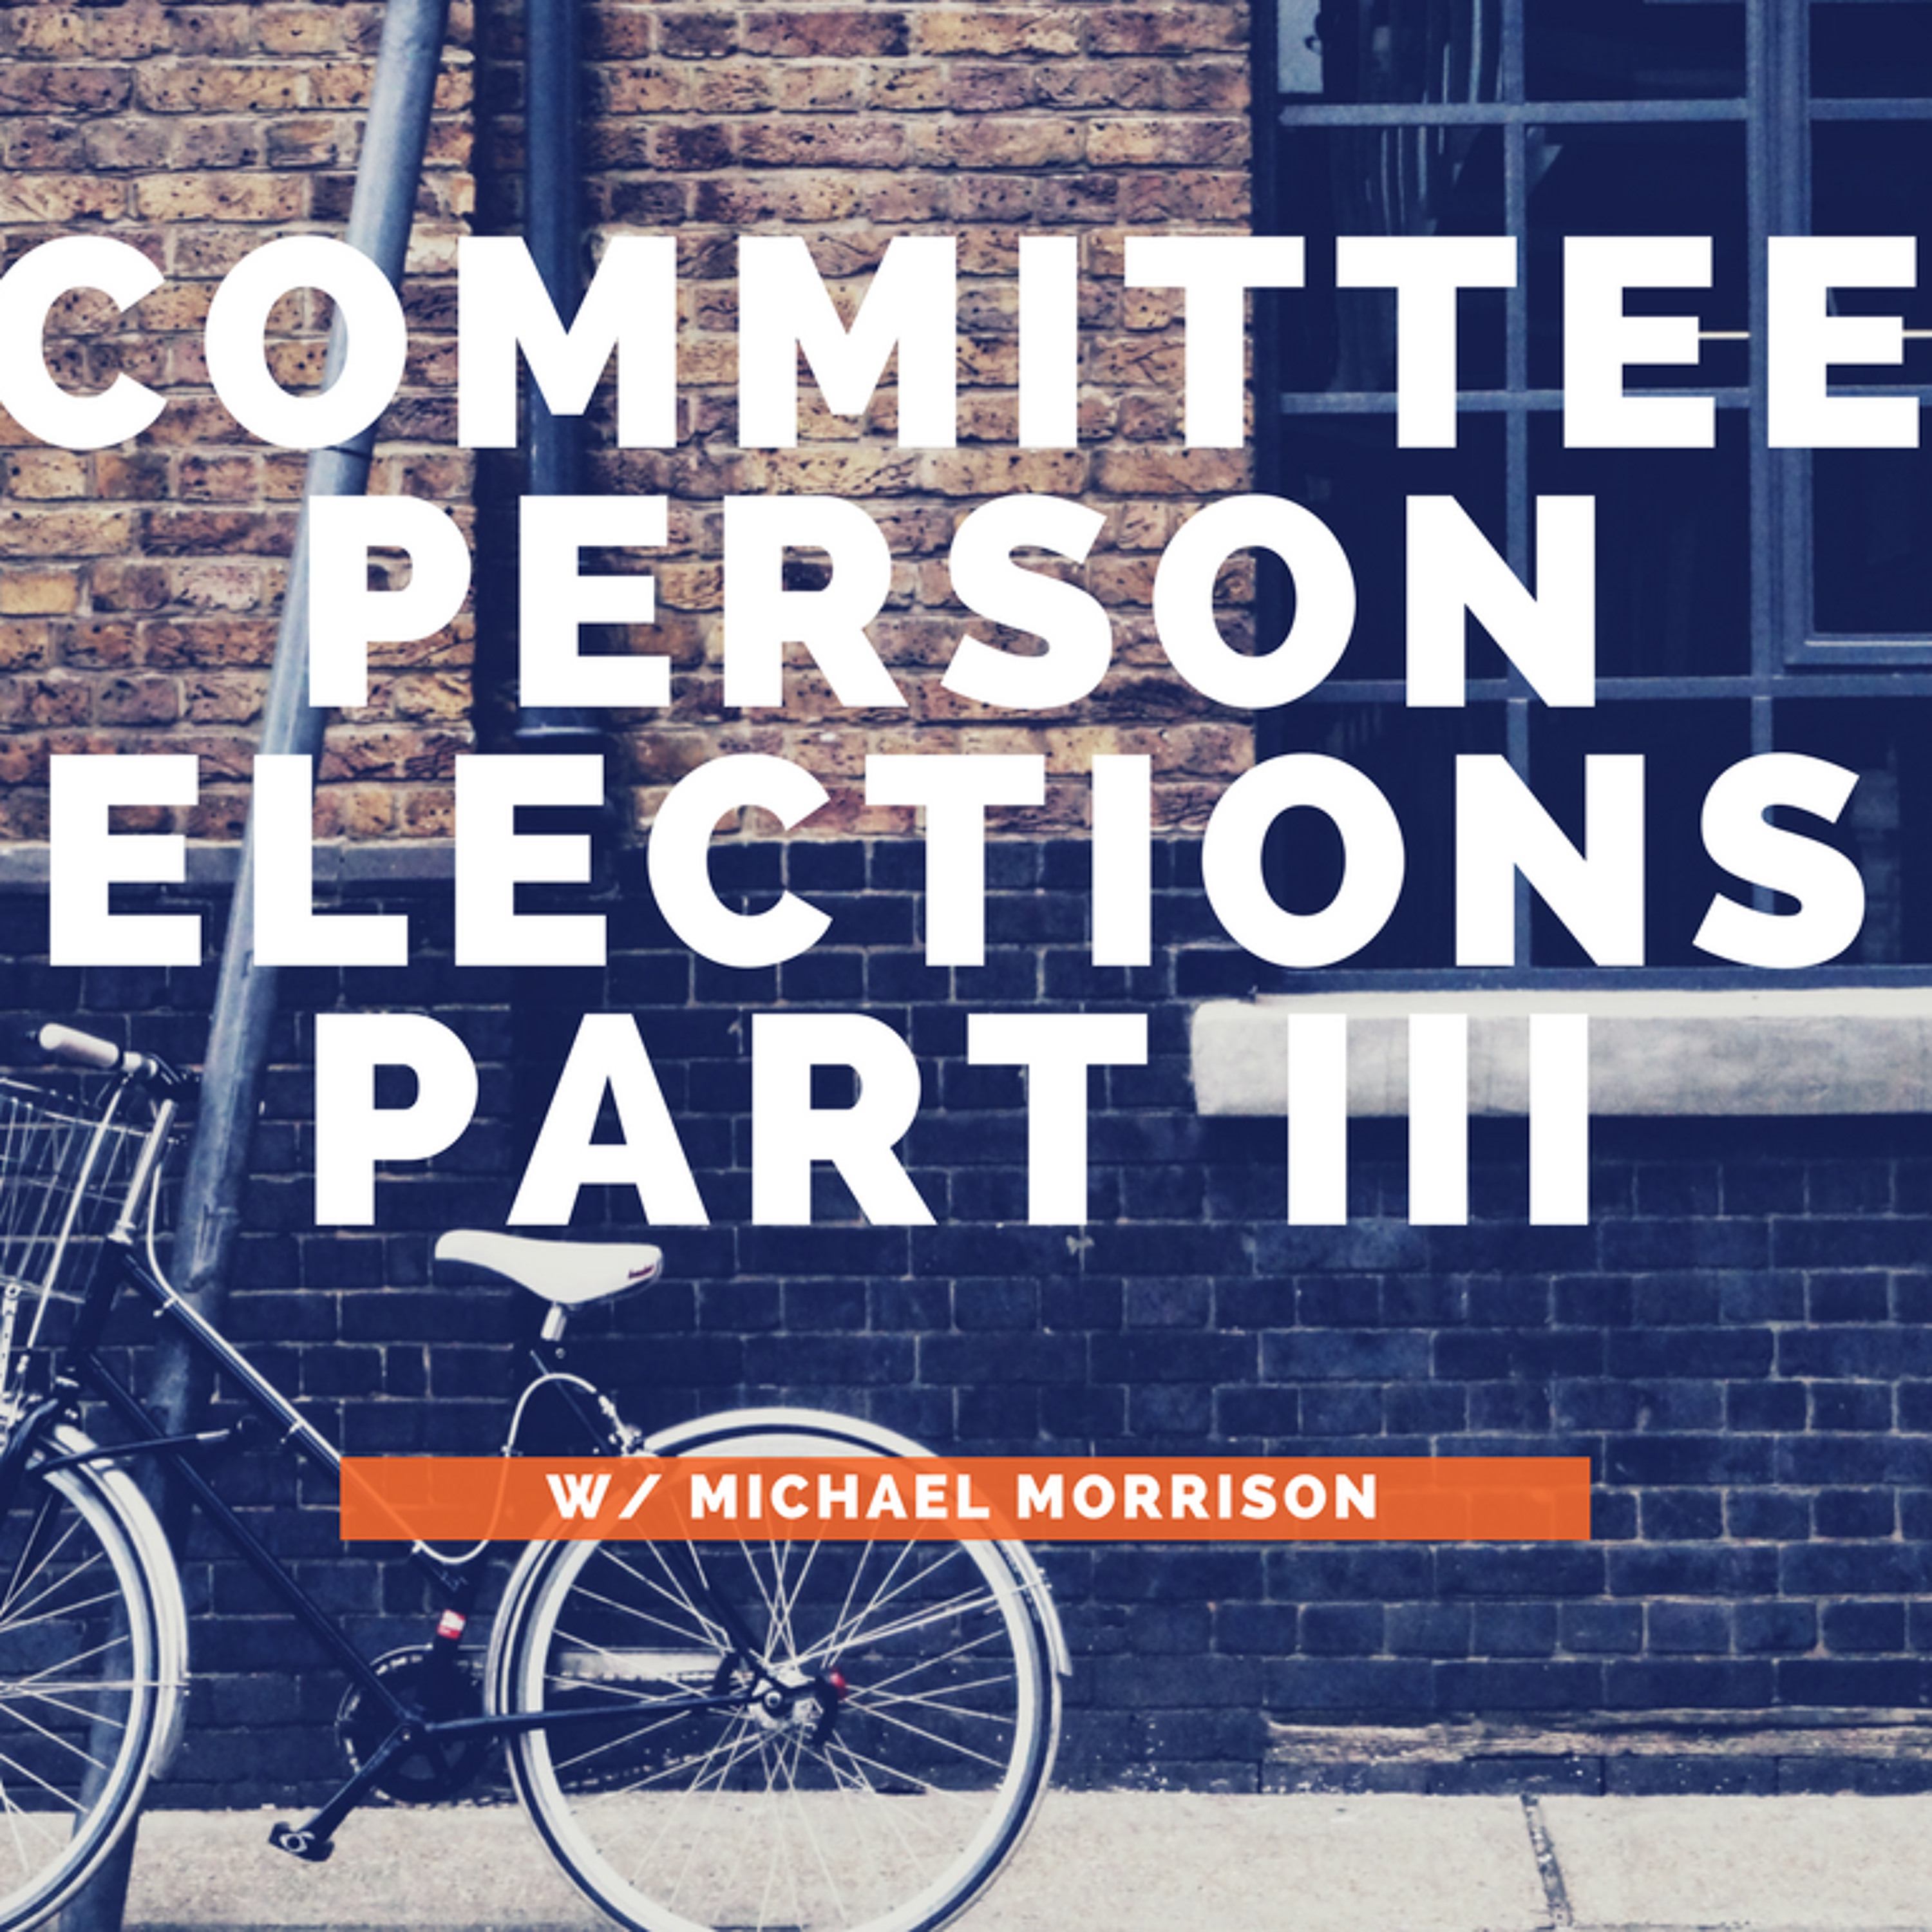 Committeeperson Elections Part III w/Michael Morrison